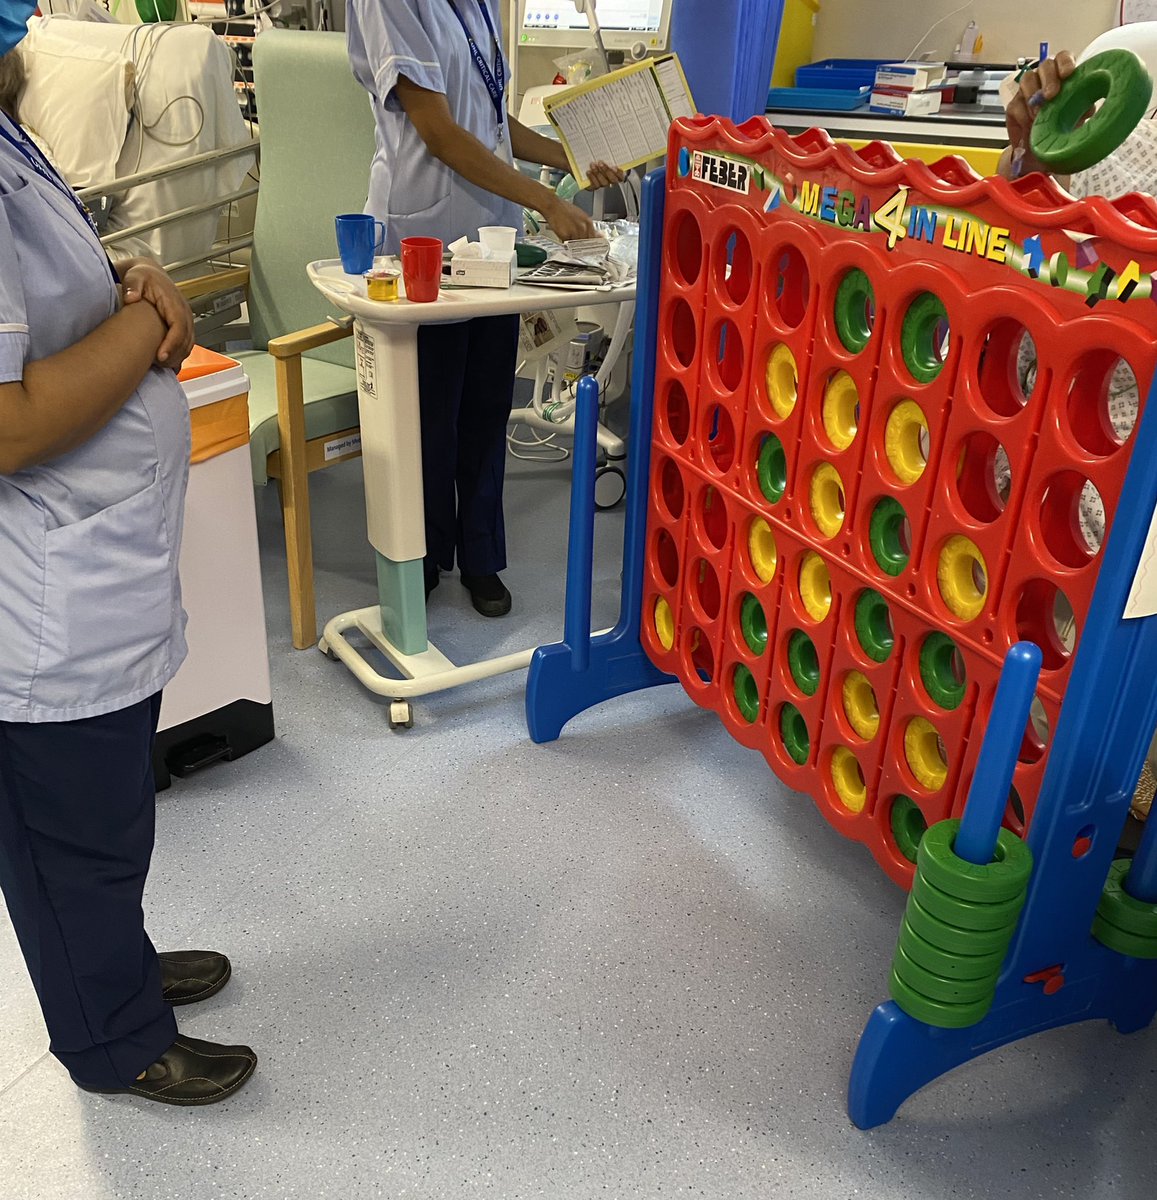 Game of giant Connect 4 anyone? Nurses Vs Patients on @AicuLri this afternoon. @Philsykes40 @uhltherapy #ICURehabDay22